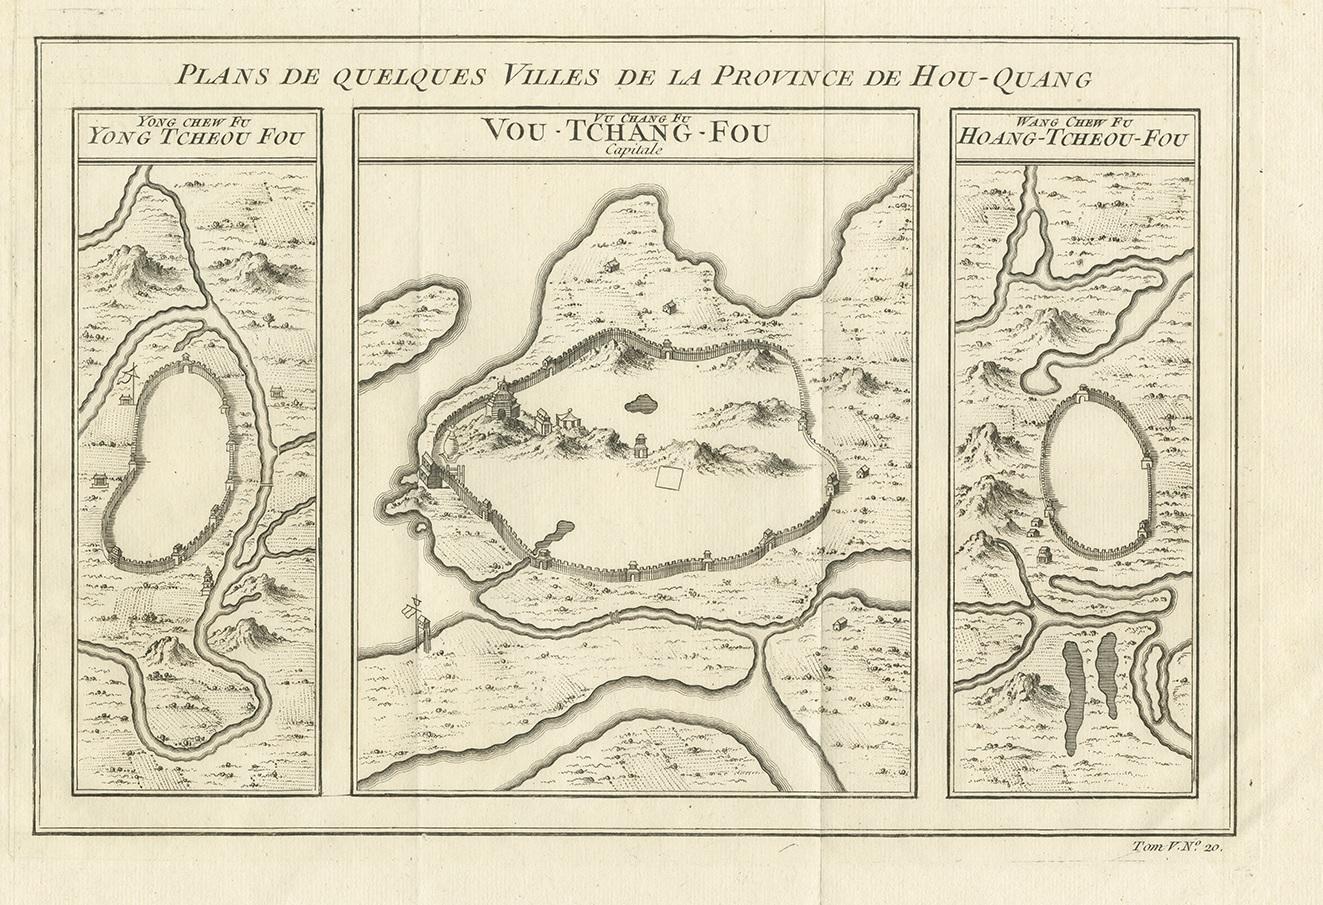 Antique print titled 'Plans de Quelques villes de la province de Hou-Quang.' Three bird's-eye view plans of walled cities in what are now China's Hubei (Hou-Quang) and Hunan Provinces on a single plate from Prevost d'Exiles' influential collection